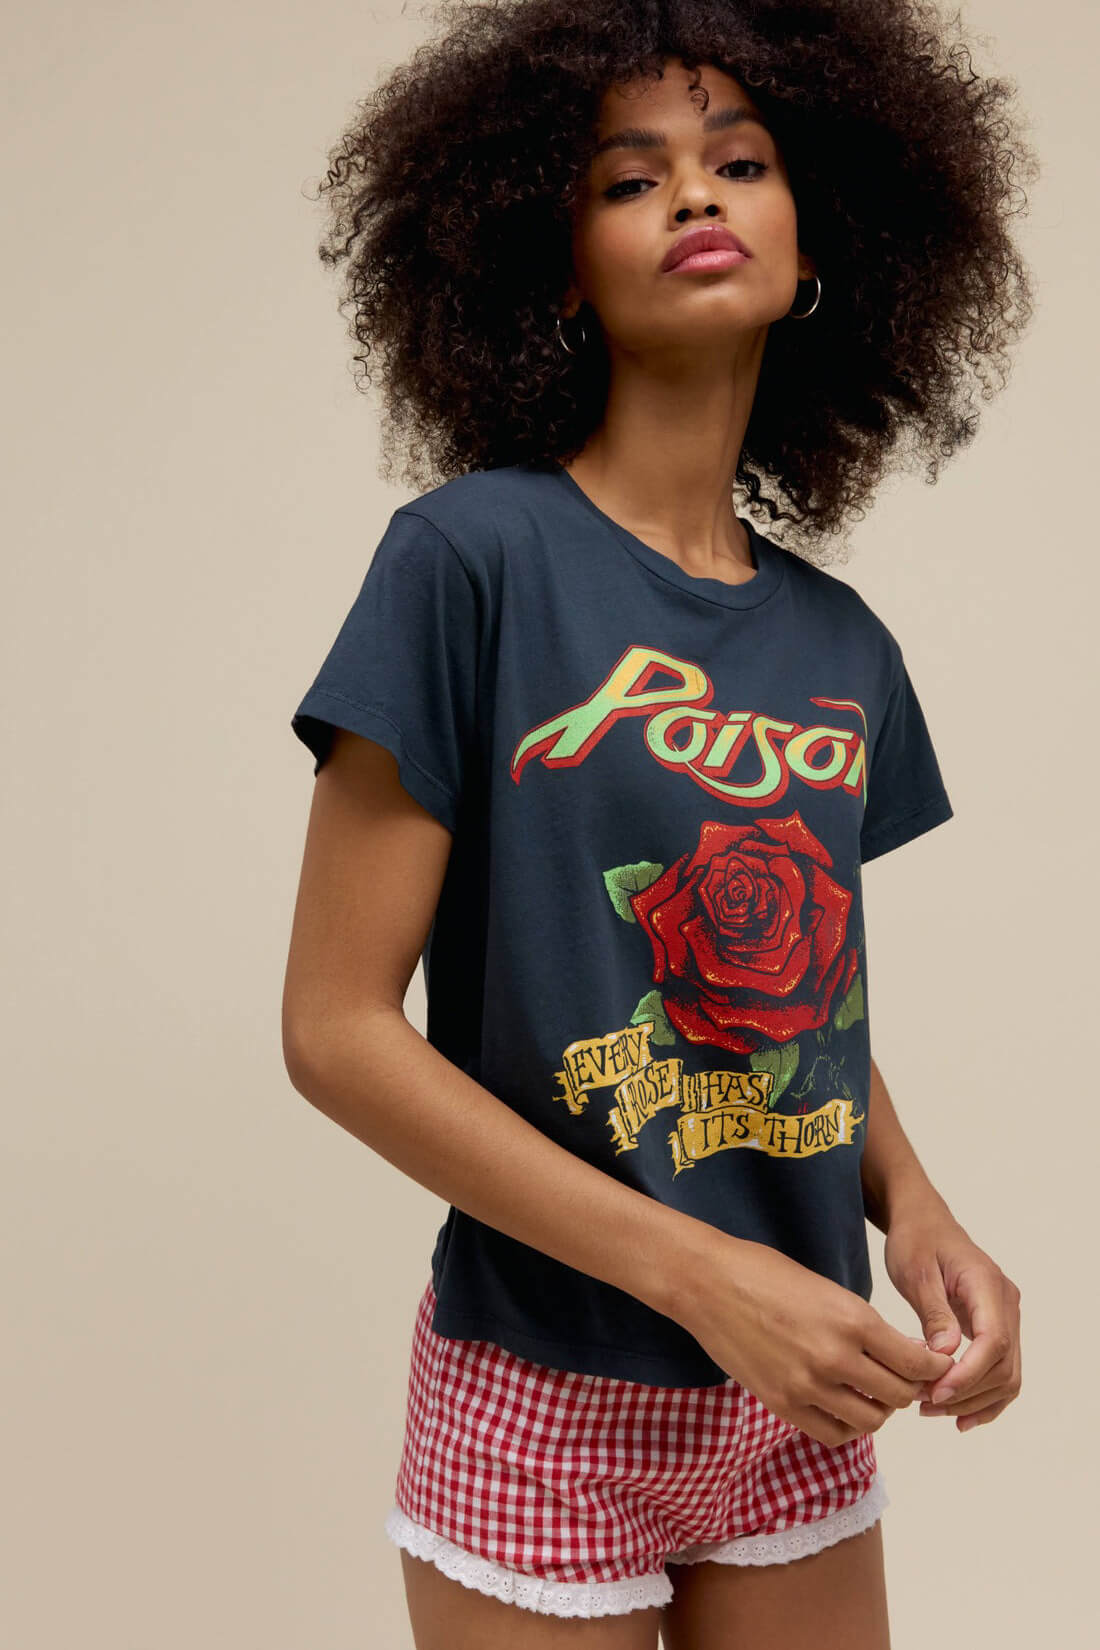 Daydreamer Poison Every Rose Has Its Thorn Tee